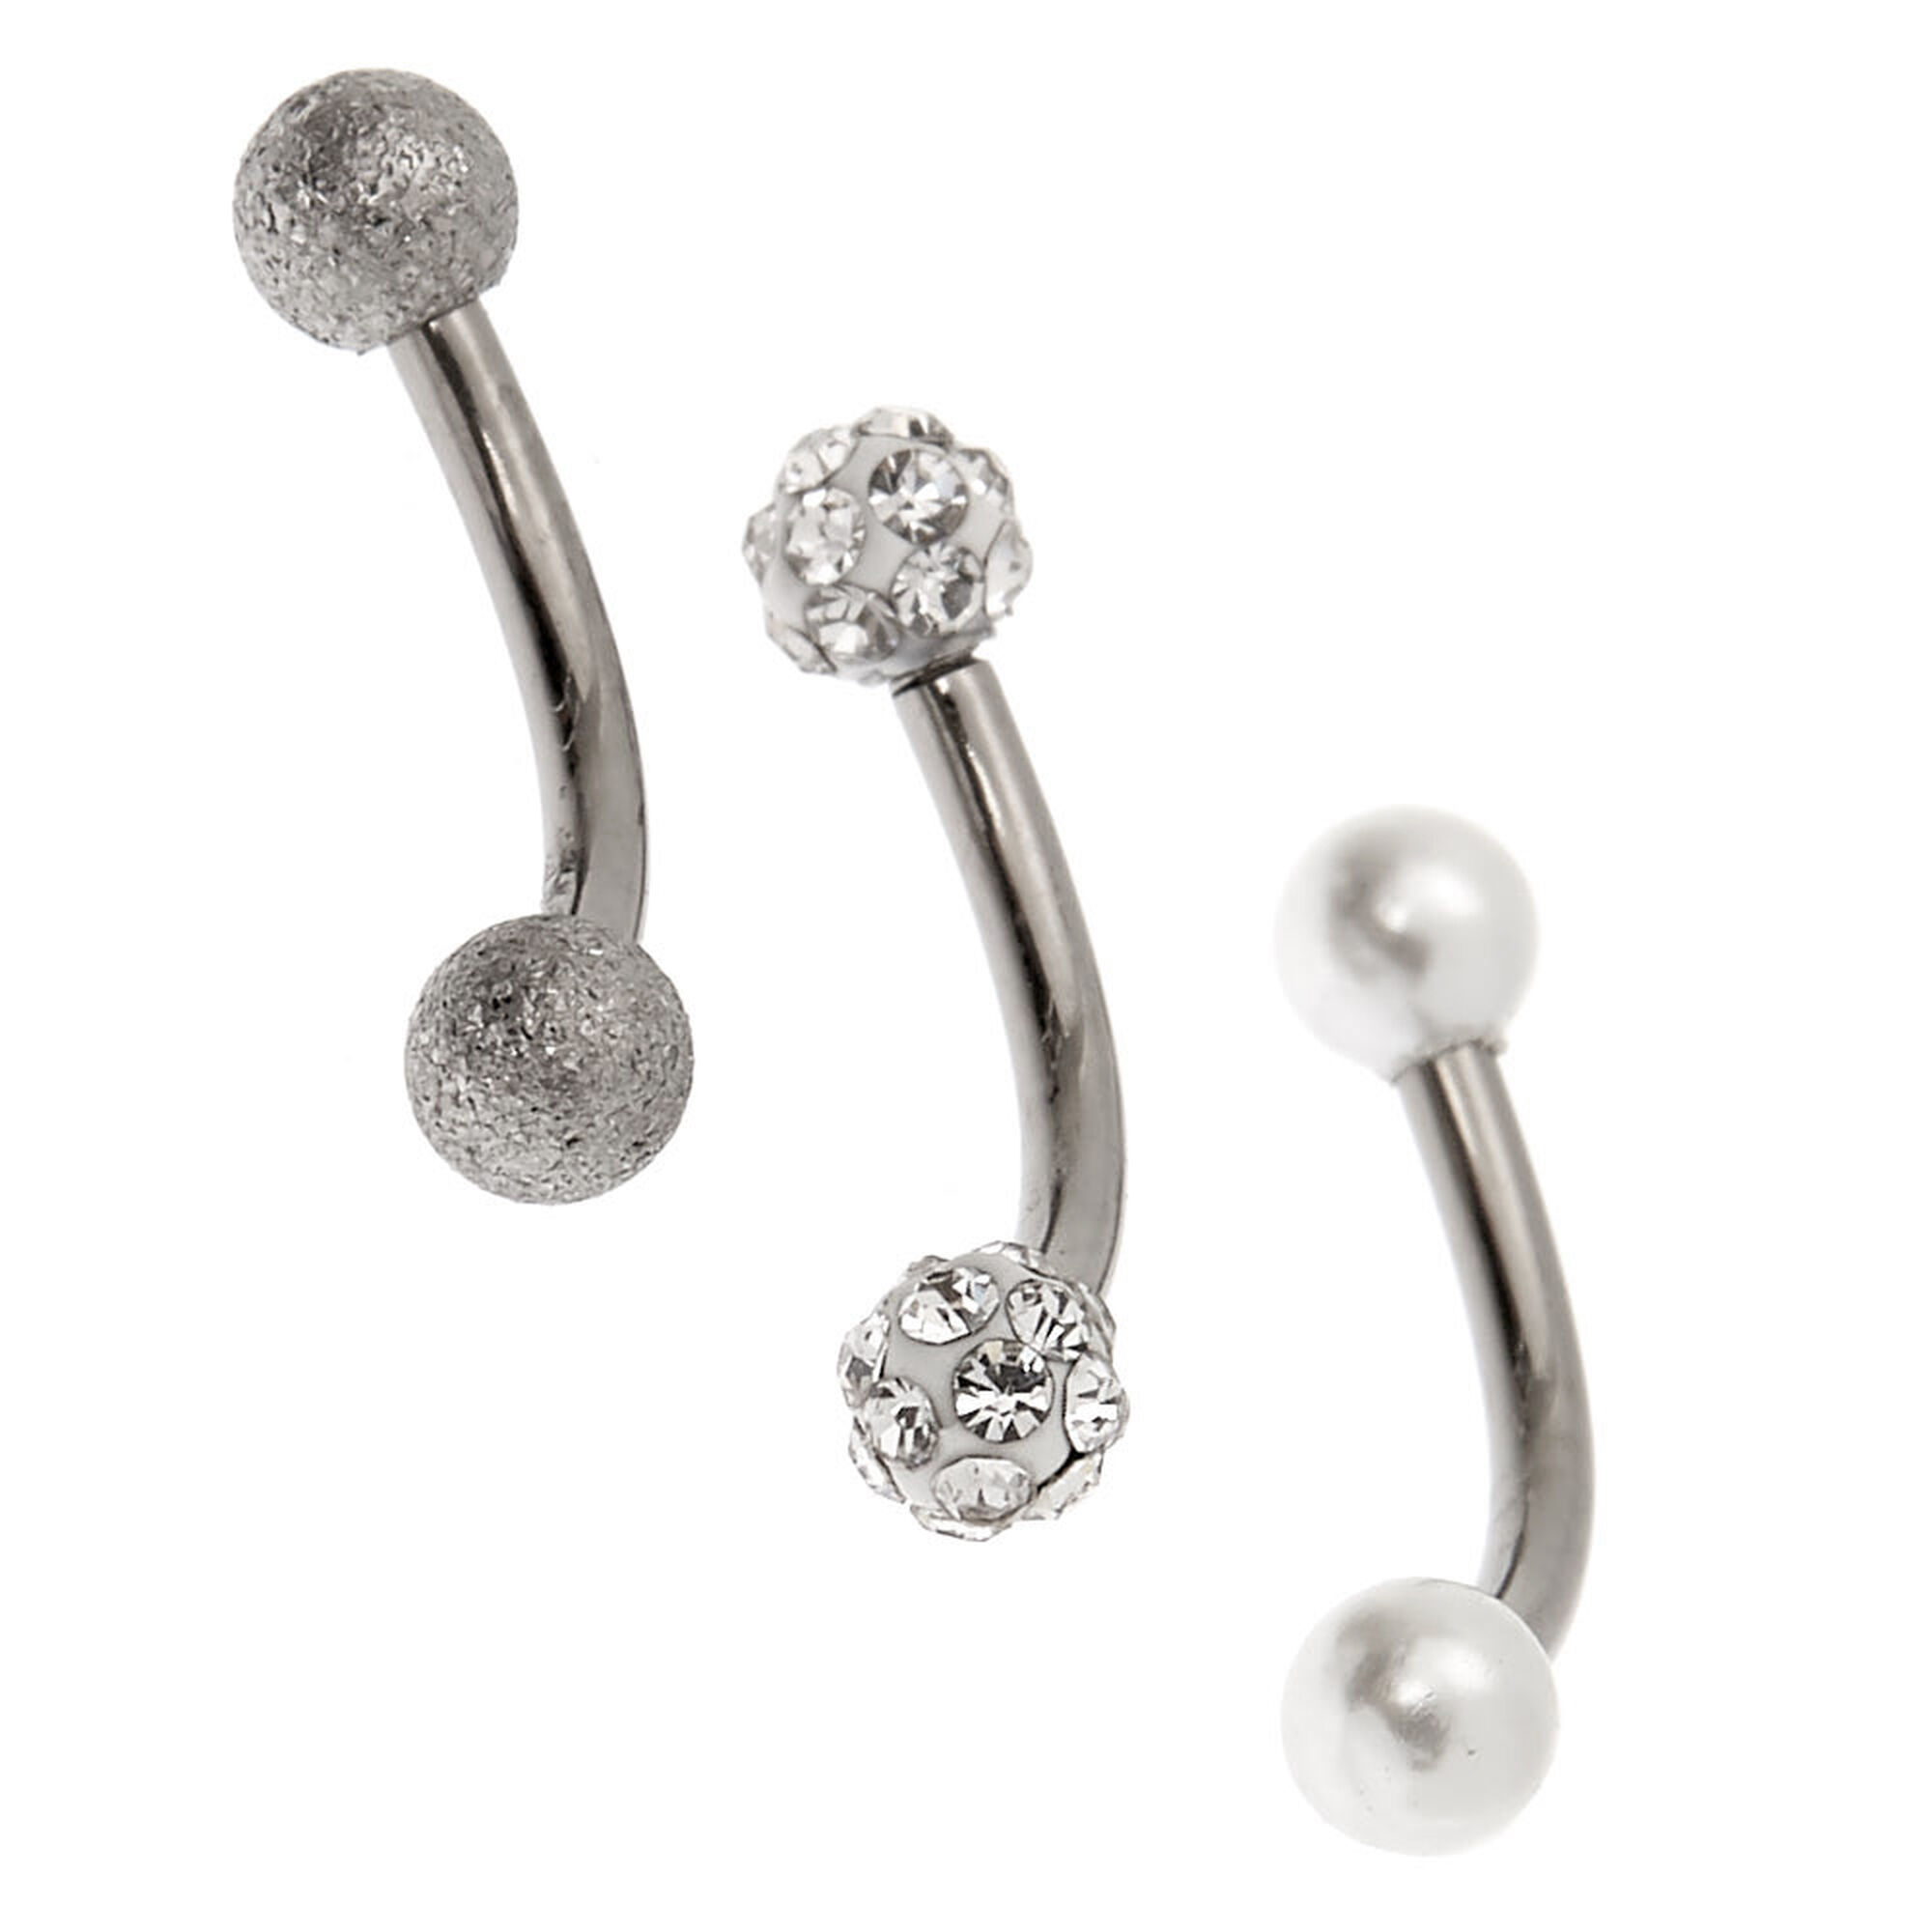 View Claires Tone Titanium 16G Fireball Pearl Rook Earrings 3 Pack Silver information